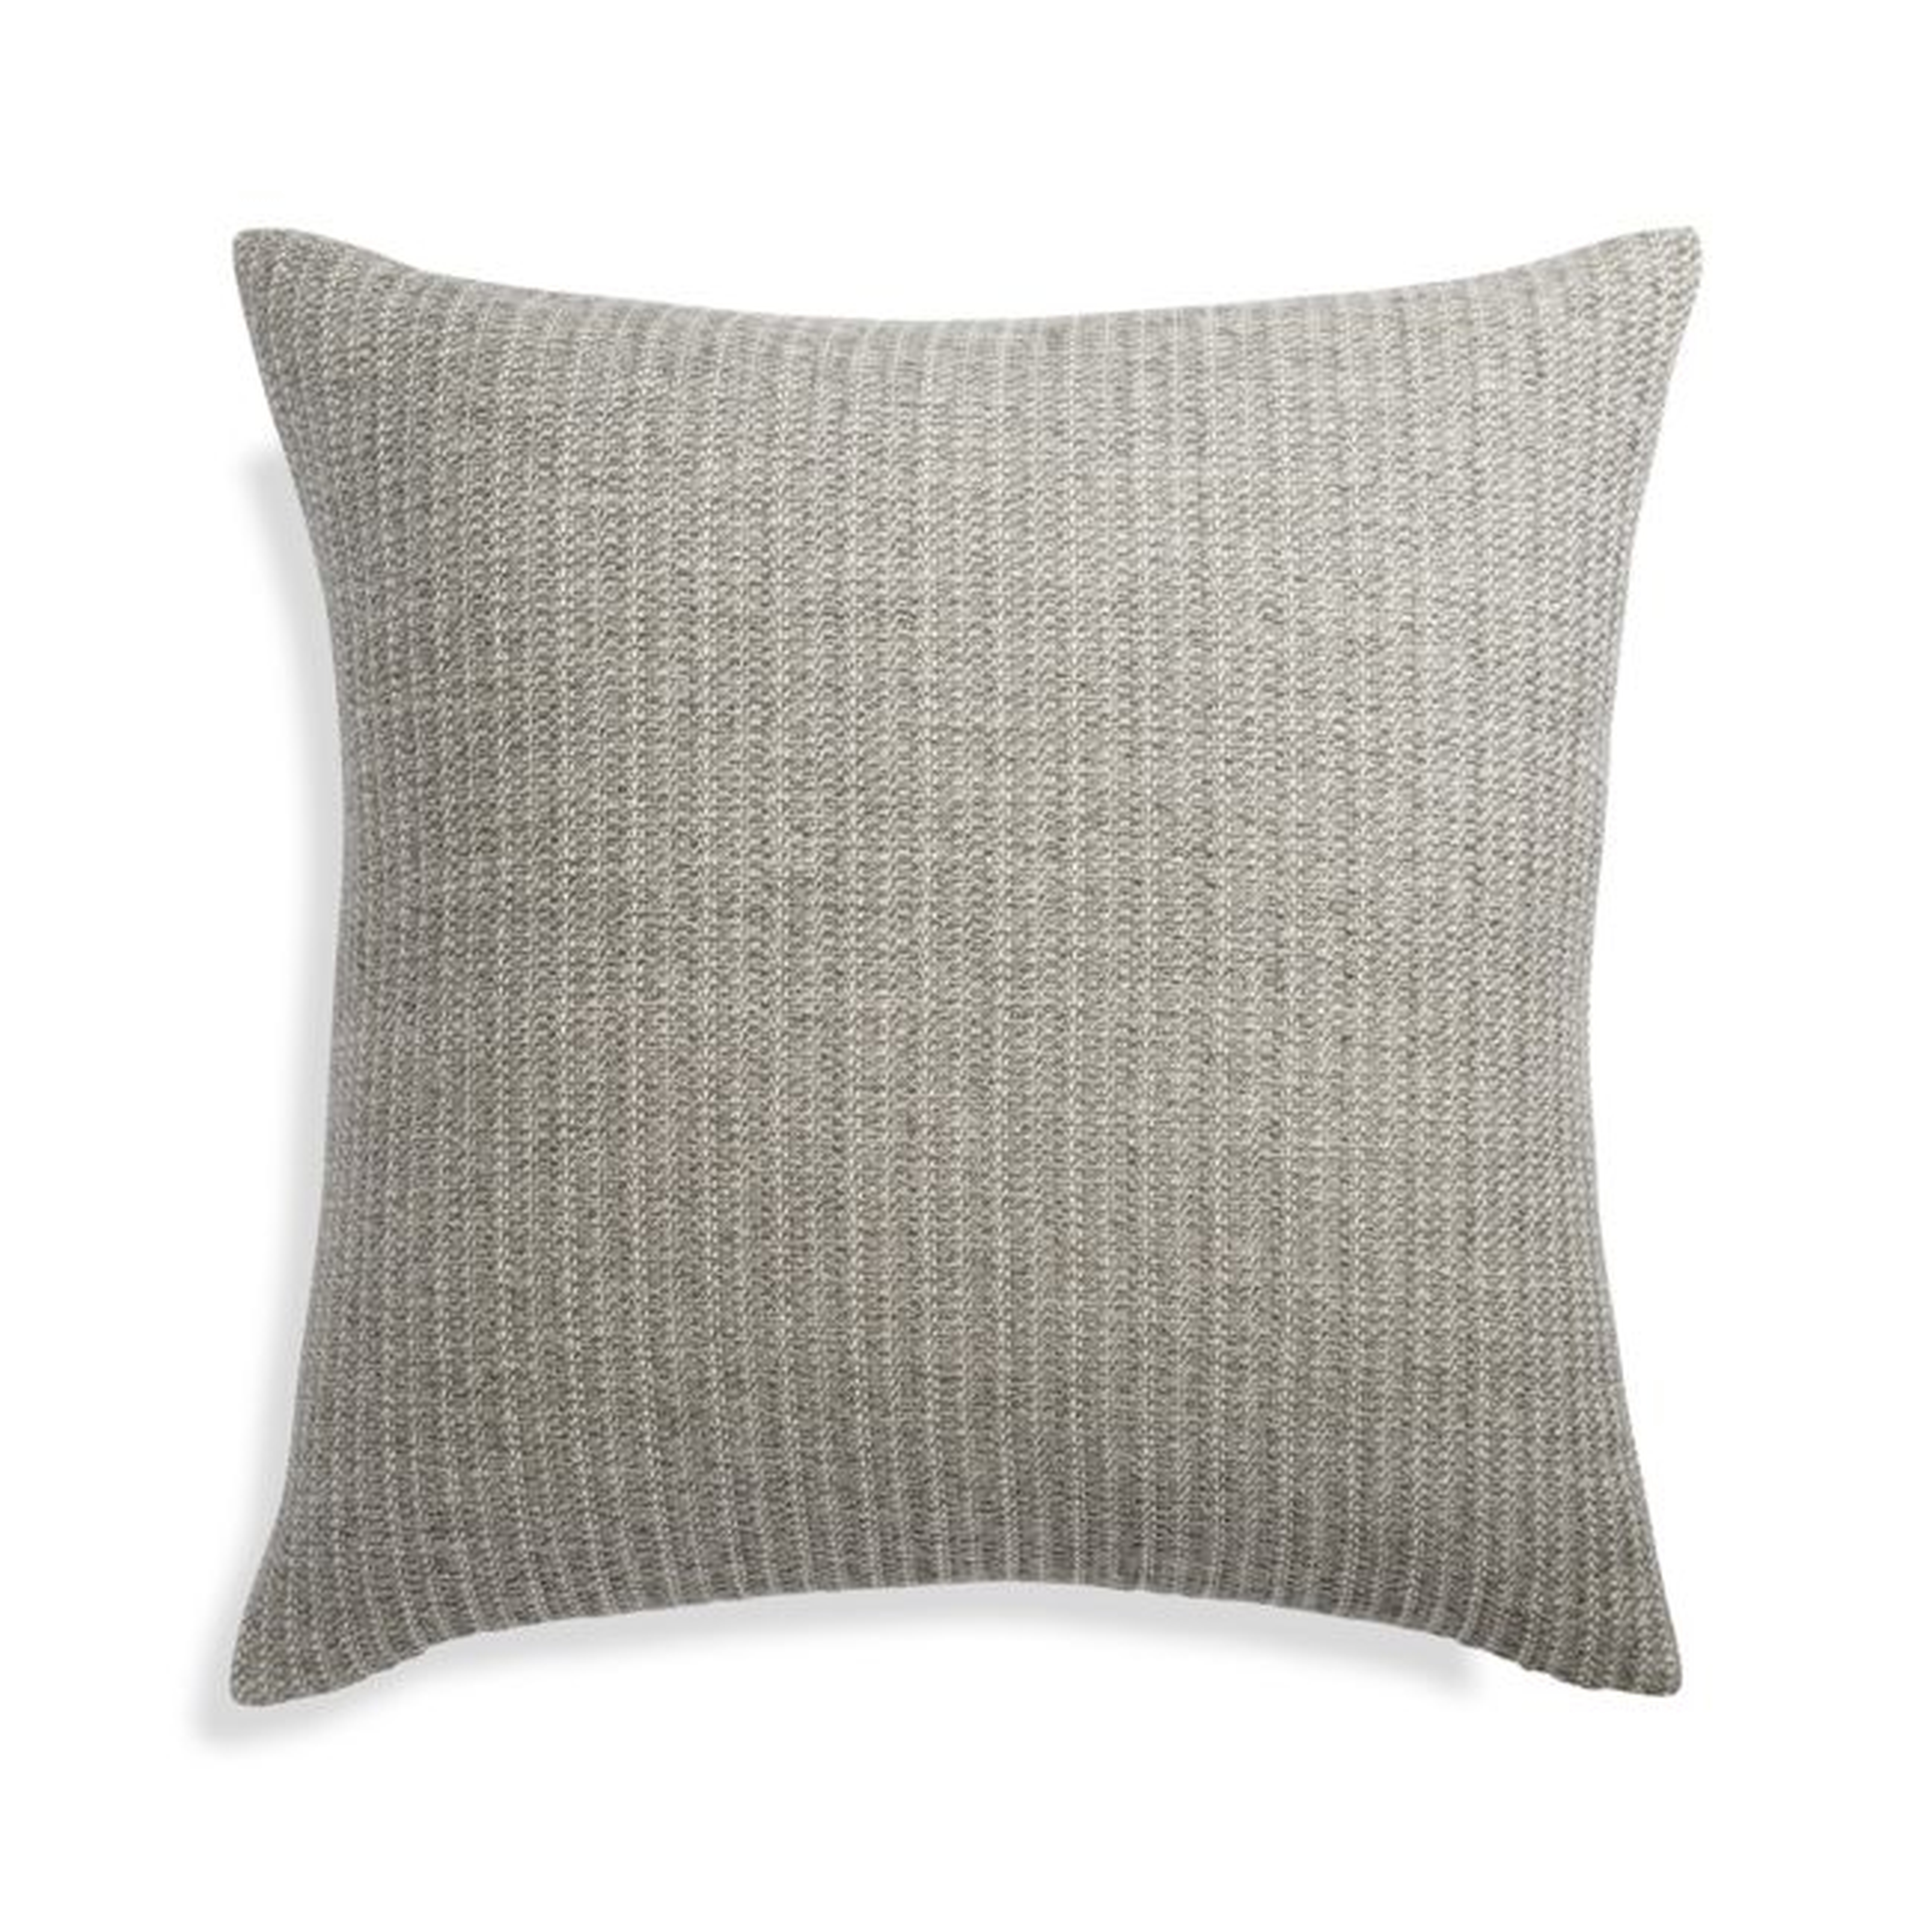 Liano Grey 23" Pillow Cover - Crate and Barrel